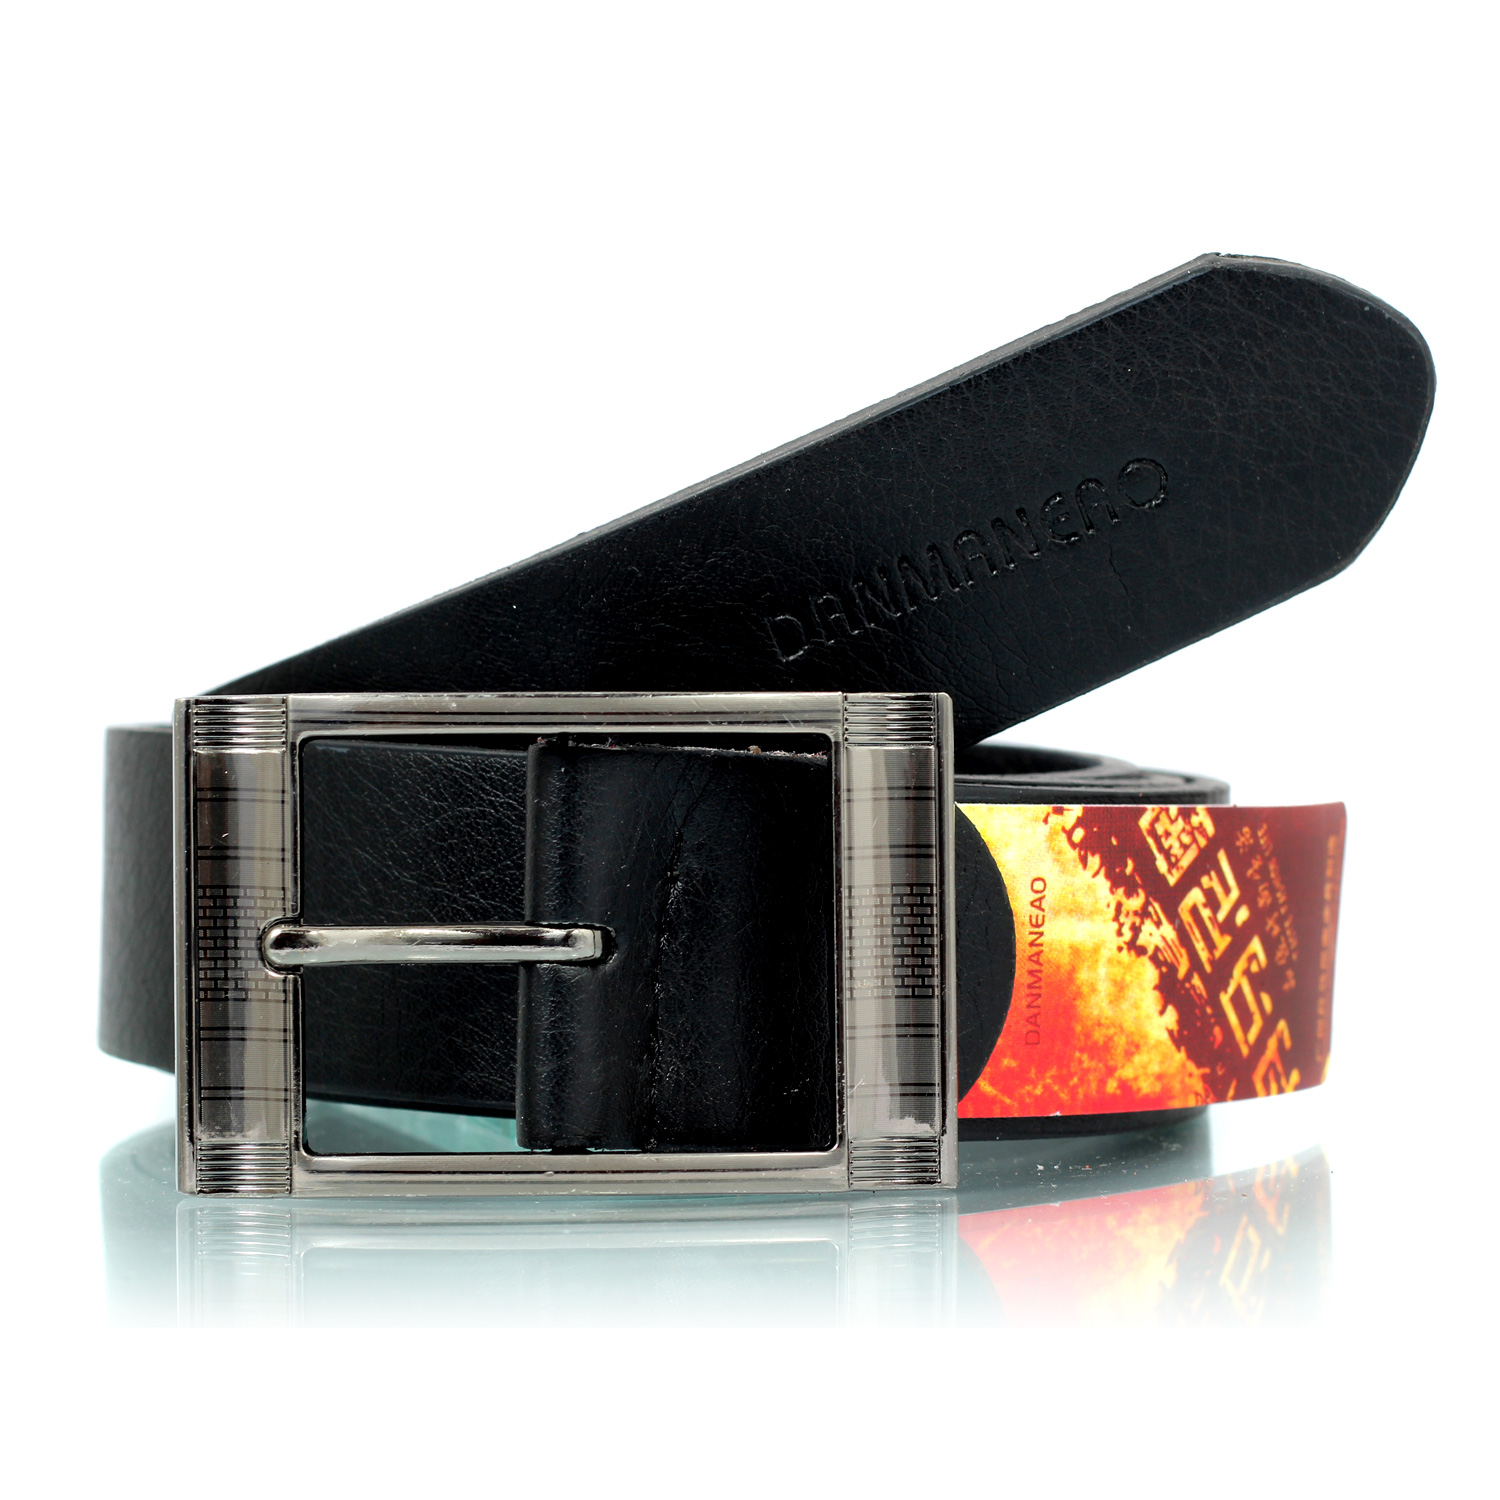 Curved metallic square buckle with royal black textured design belt